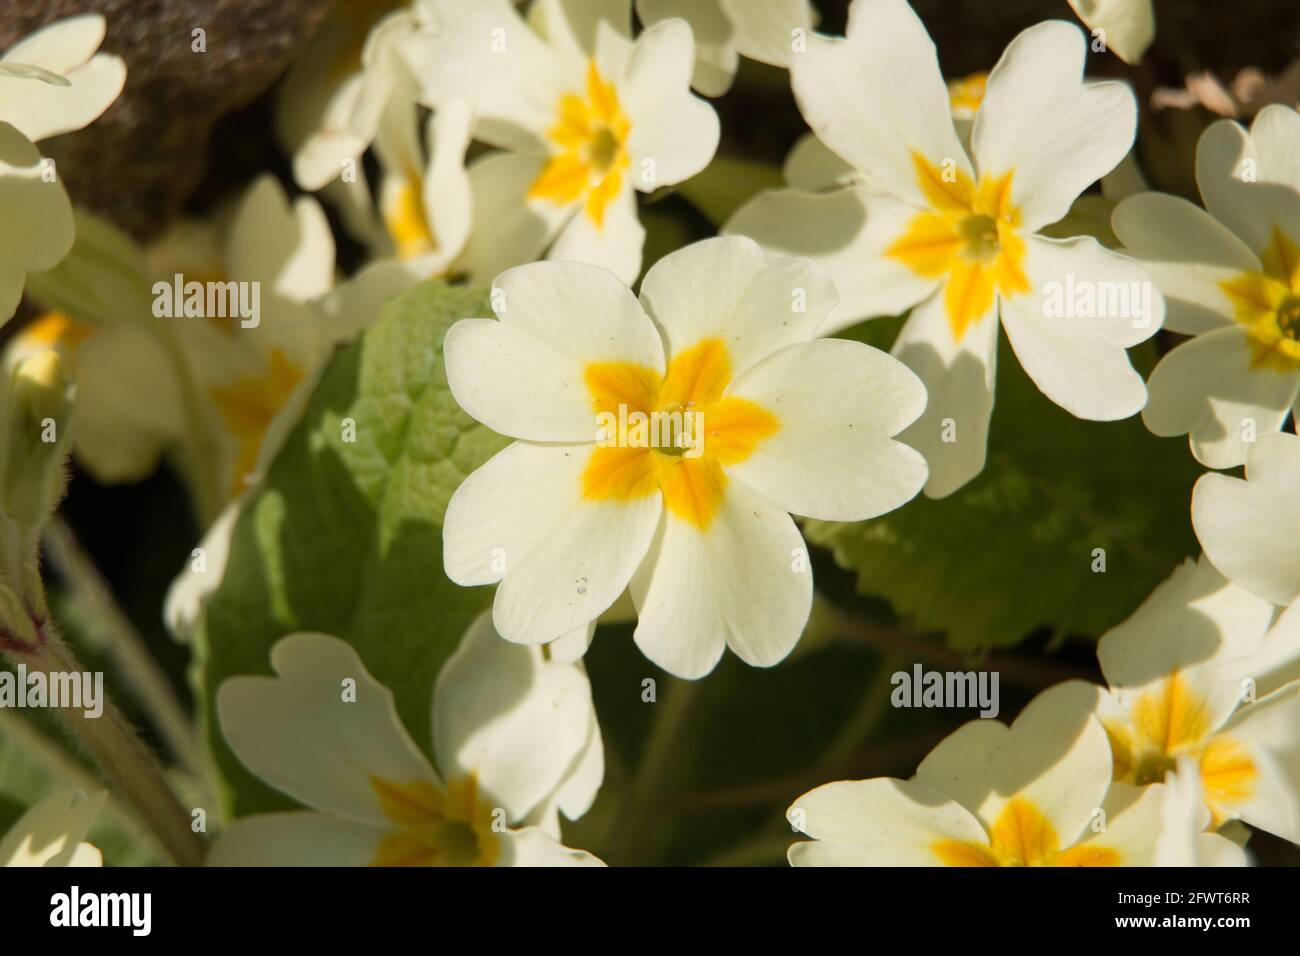 Yellow Primrose polyanthus flowers, Primula, blooming in the spring sunshine, close-up view Stock Photo